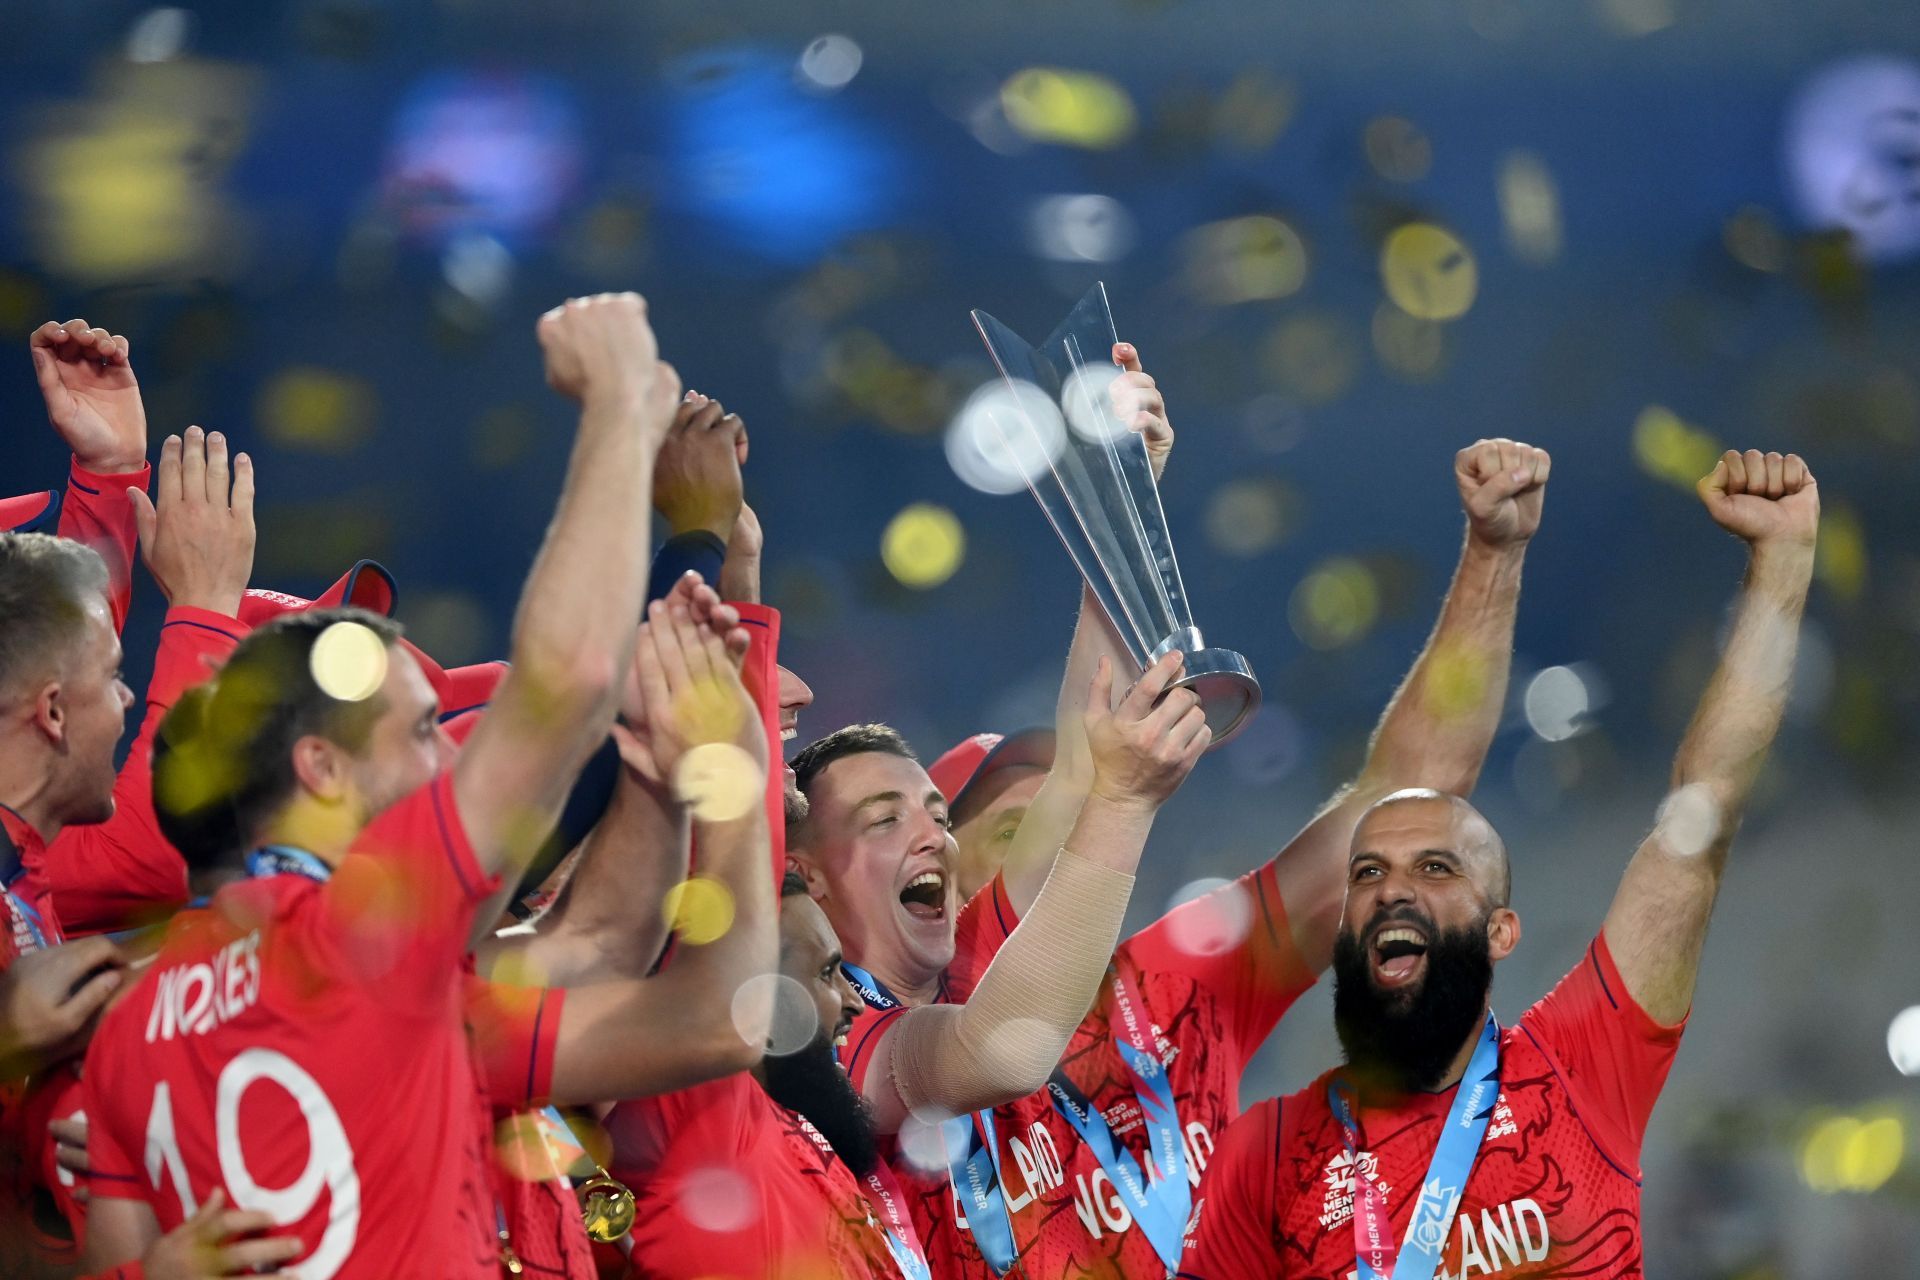 England celebrate after winning the T20 World Cup at the Melbourne Cricket Ground (MCG). Pic: Getty Images